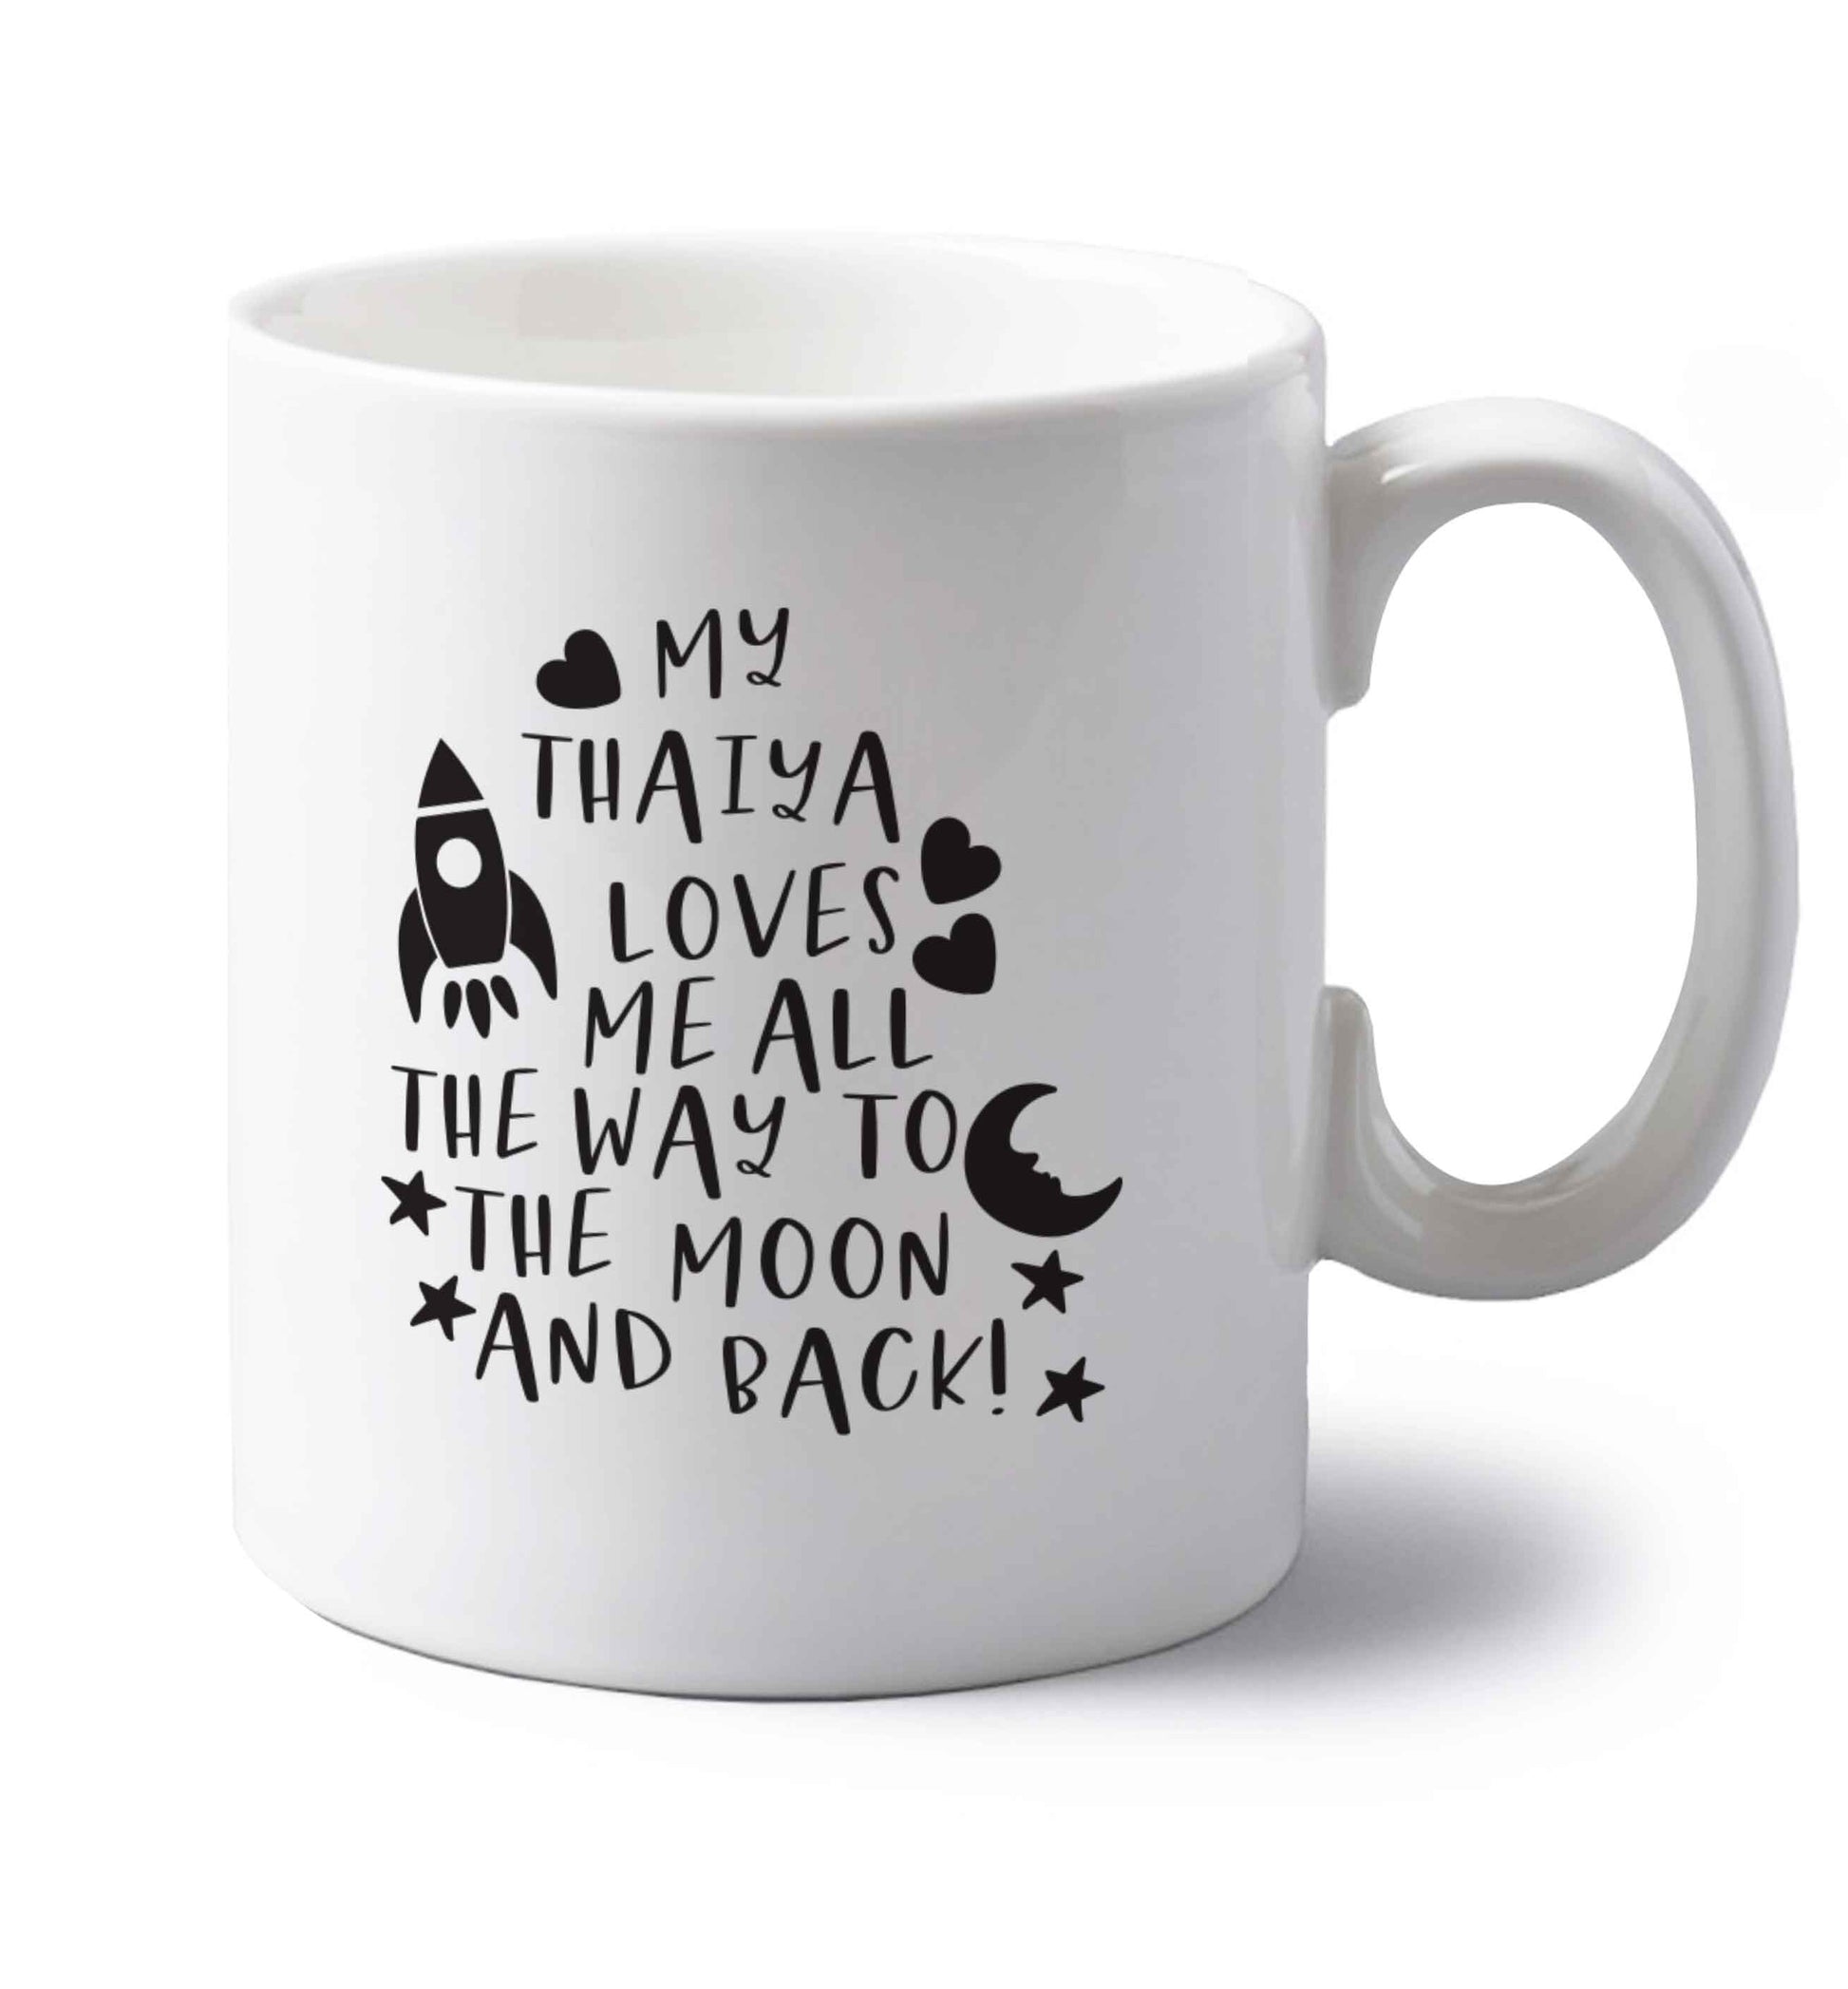 My thaiya loves me all the way to the moon and back left handed white ceramic mug 